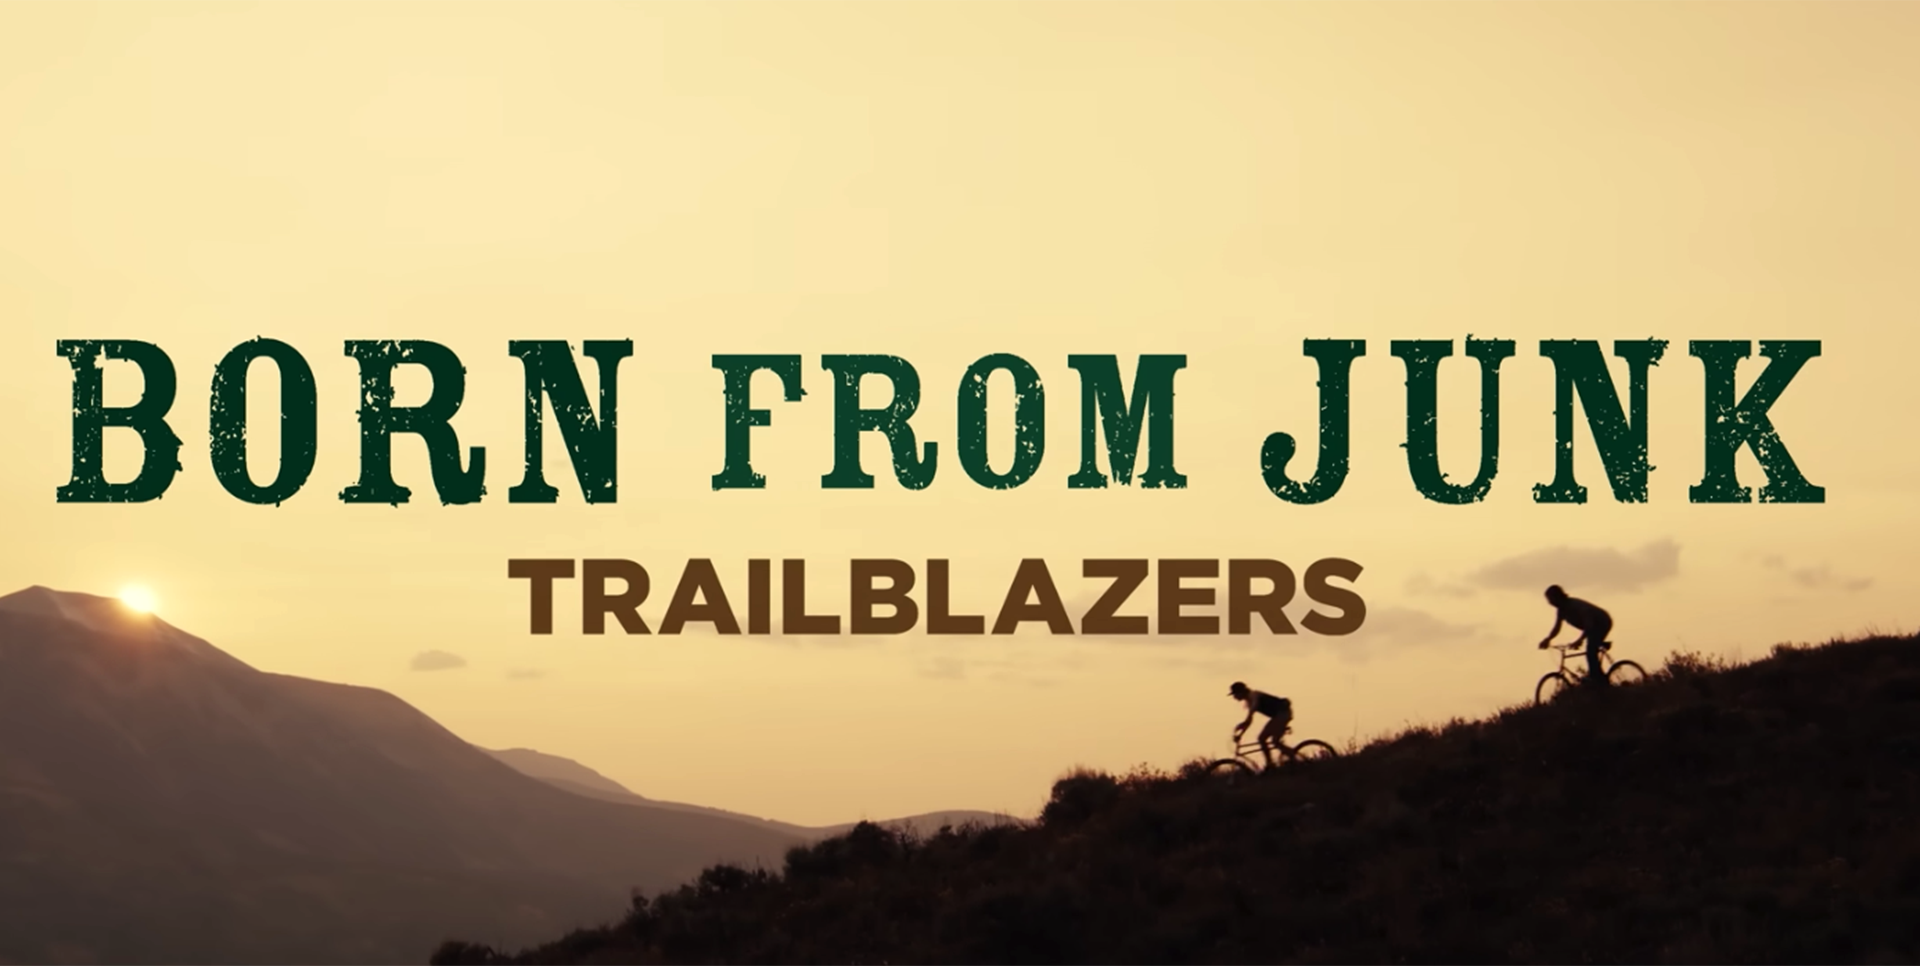 Title card from Born From Junk 2, a short film about mountain biking.